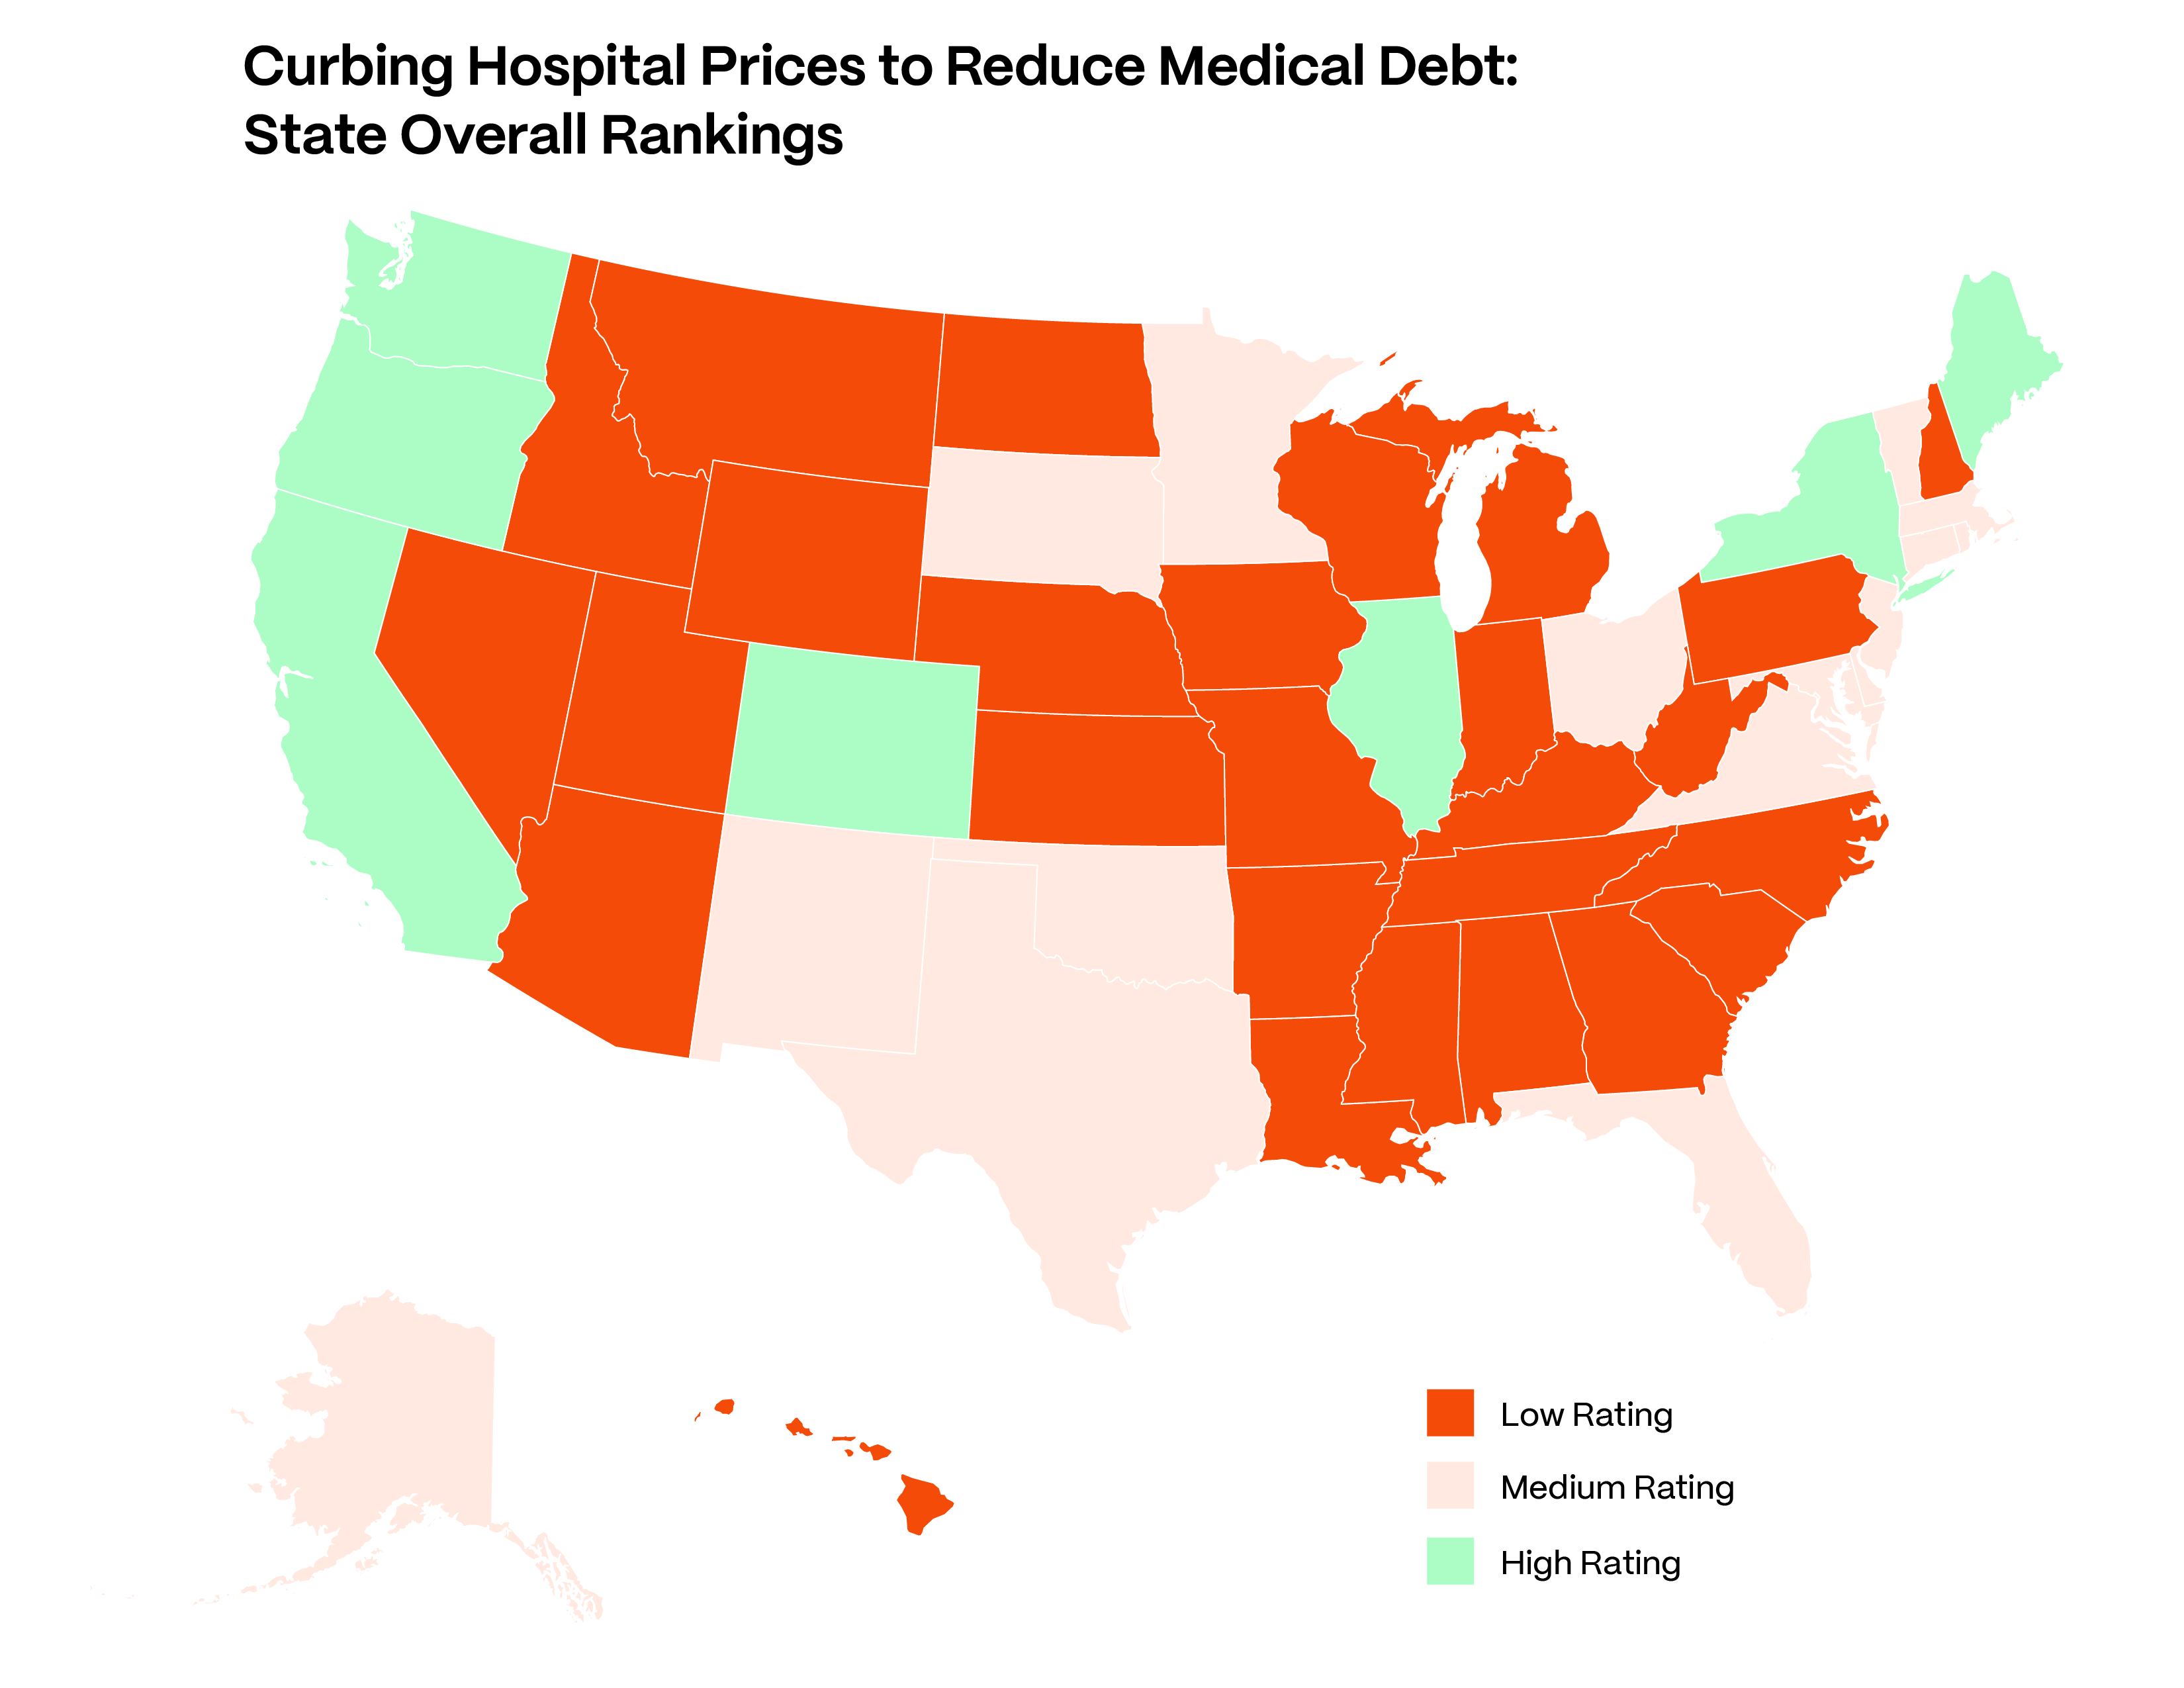 Map of the United States ranking all 50 States and D.C. their low, medium or high impact of Hospital Prices on Medical Debt. States are shaded with orange to represent a "low" rating, beige to represent a "medium" rating, and green for a "high" rating.